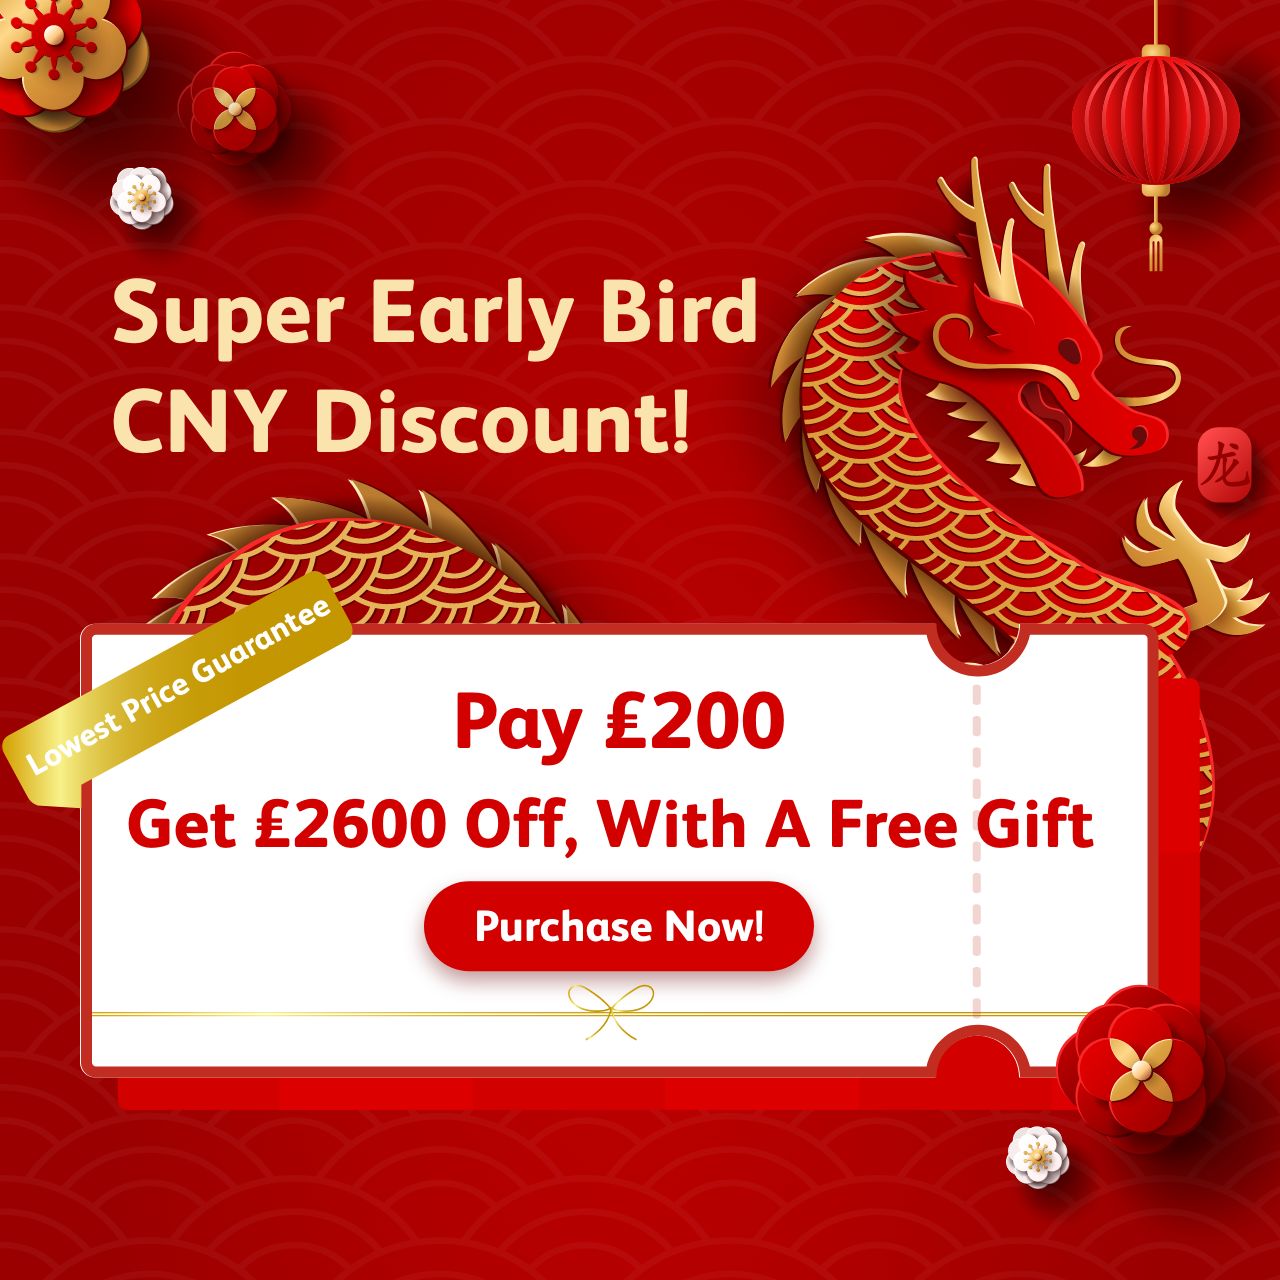 Super Early Bird CNY Discount Coupon